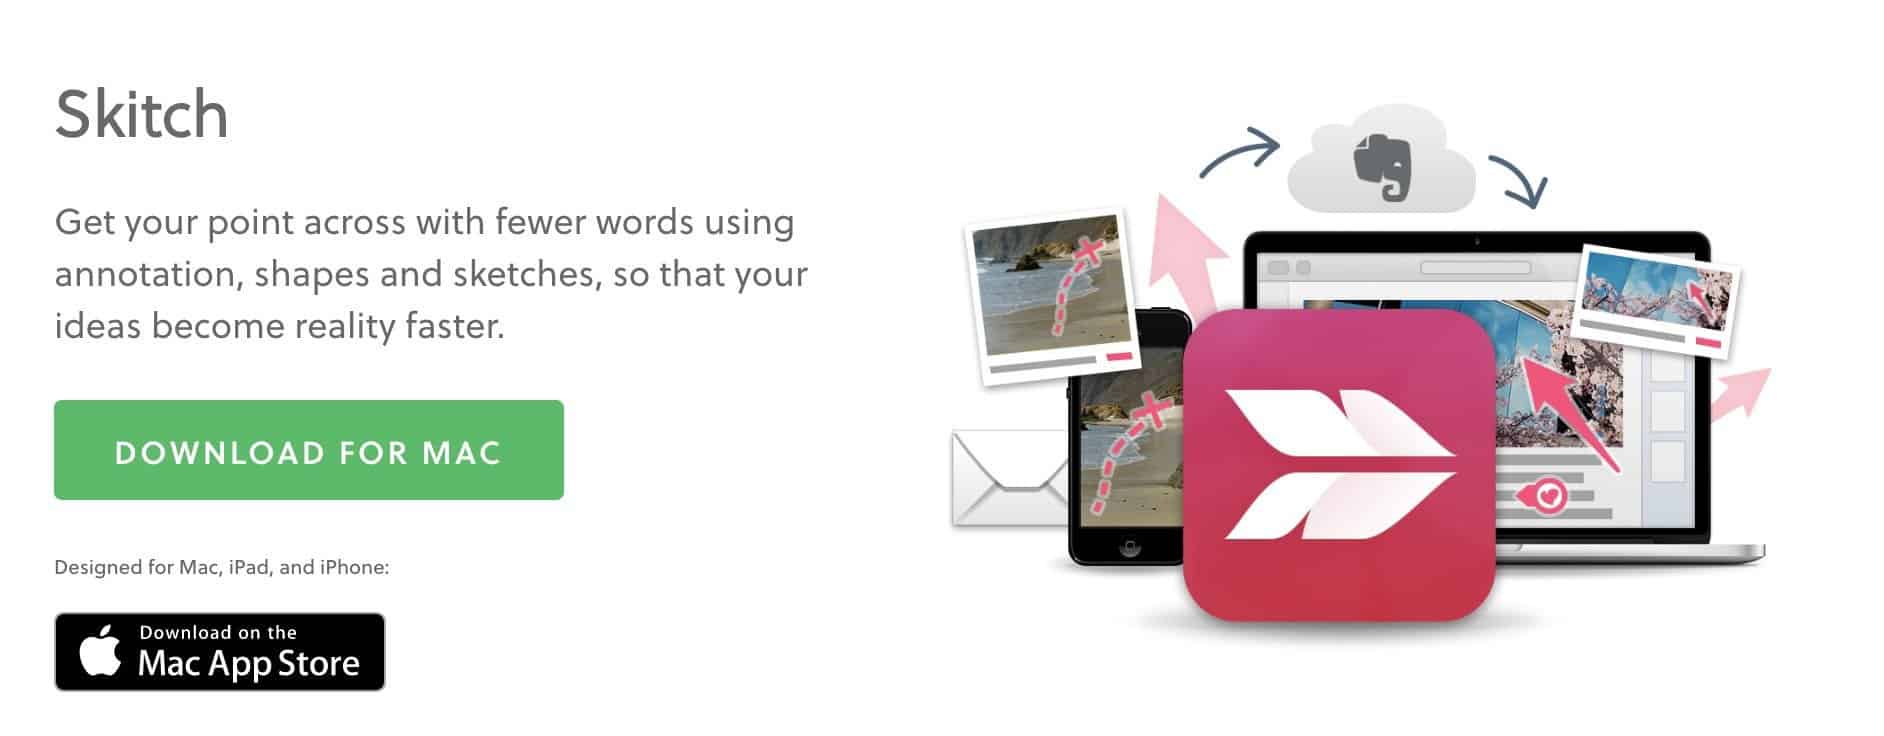 skitch by evernote